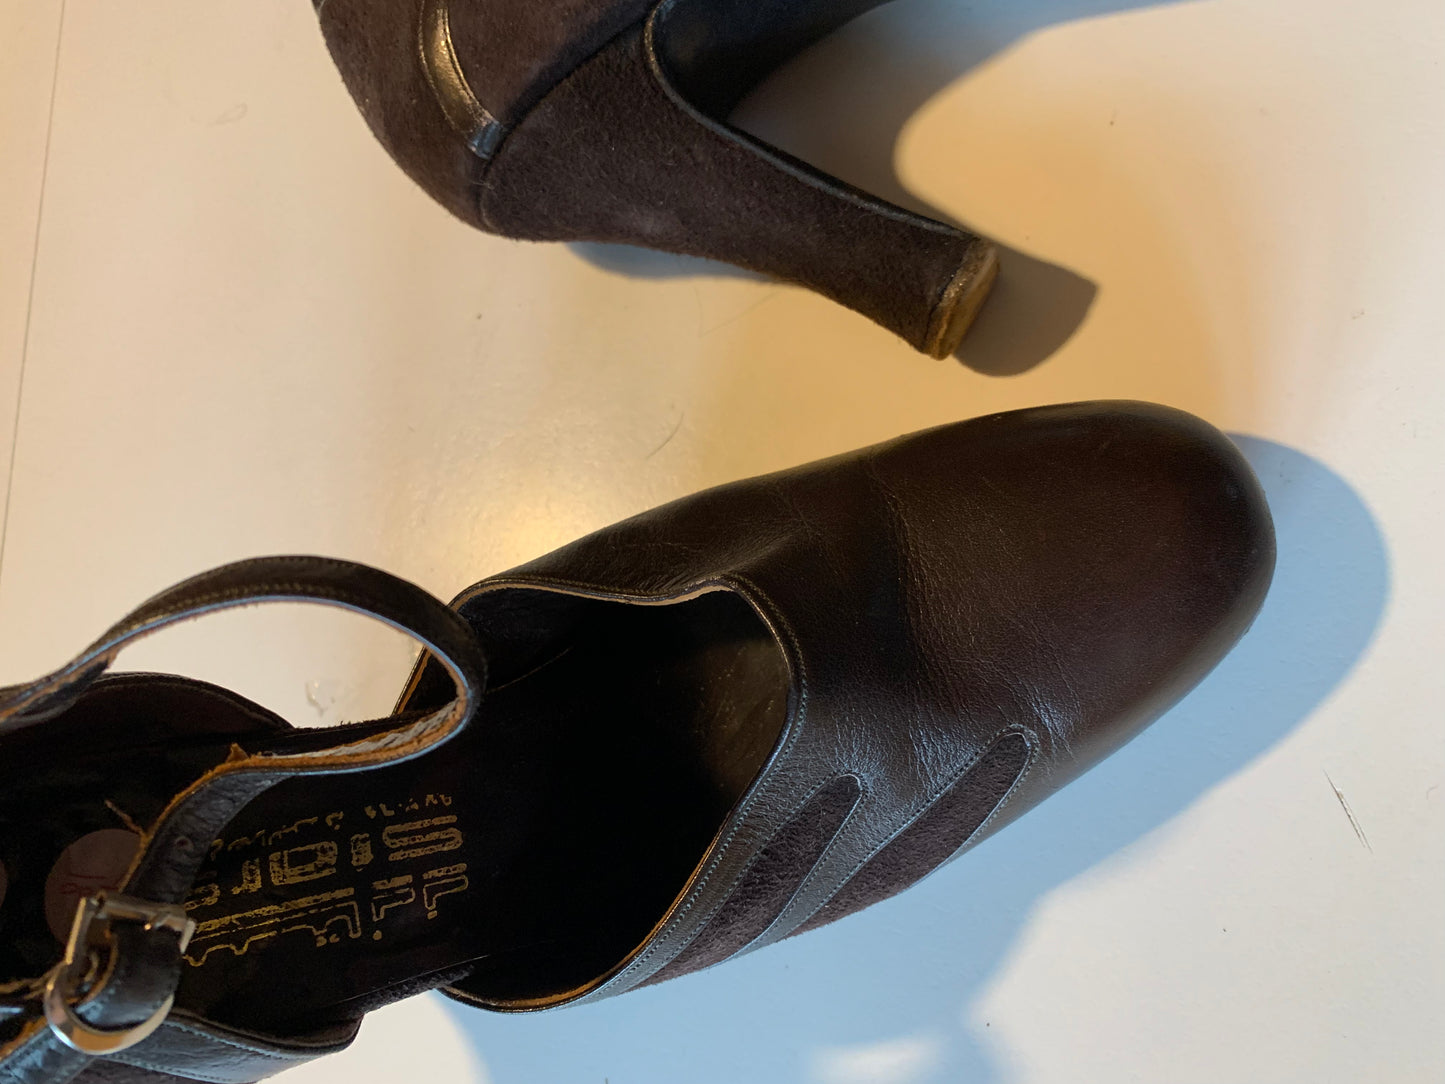 Chocolate Brown Suede and Leather Ankle Strap Rounded Toe Shoes circa 1970s 8